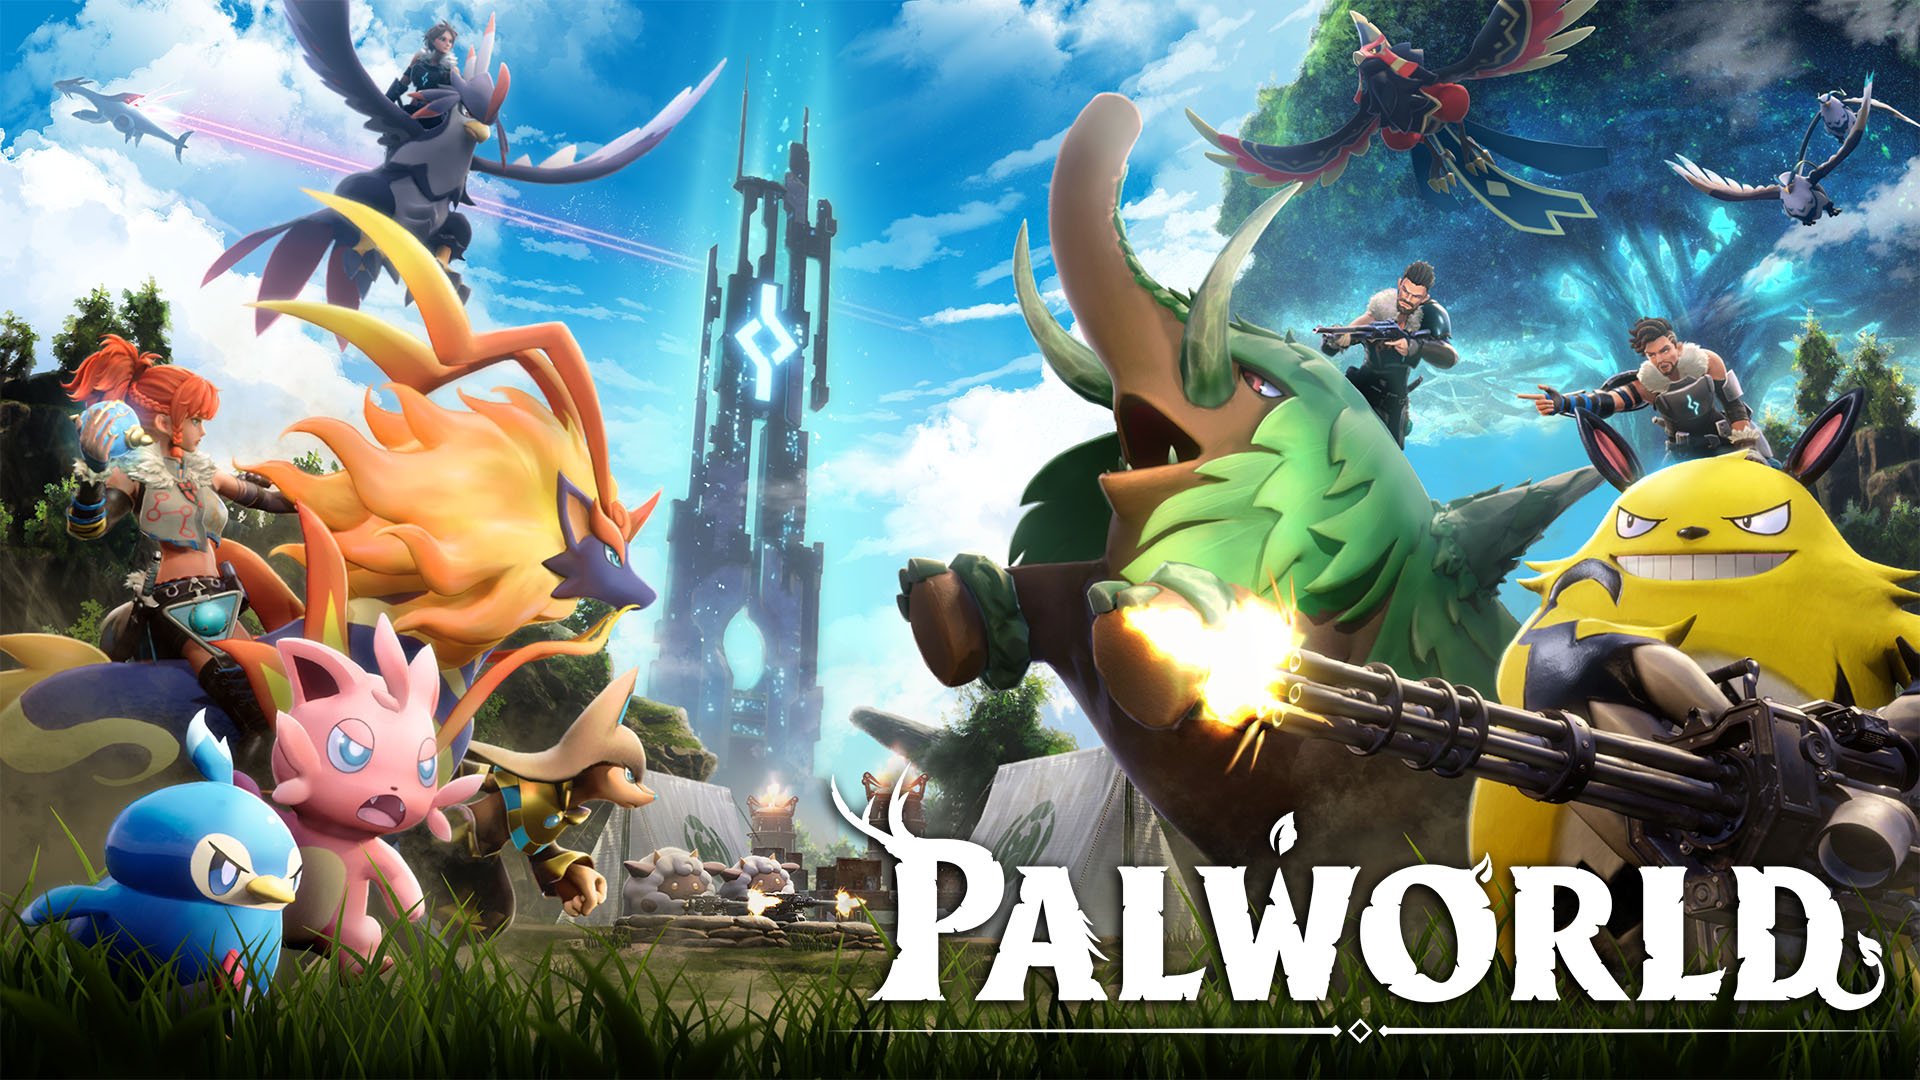 Palworld Release Date